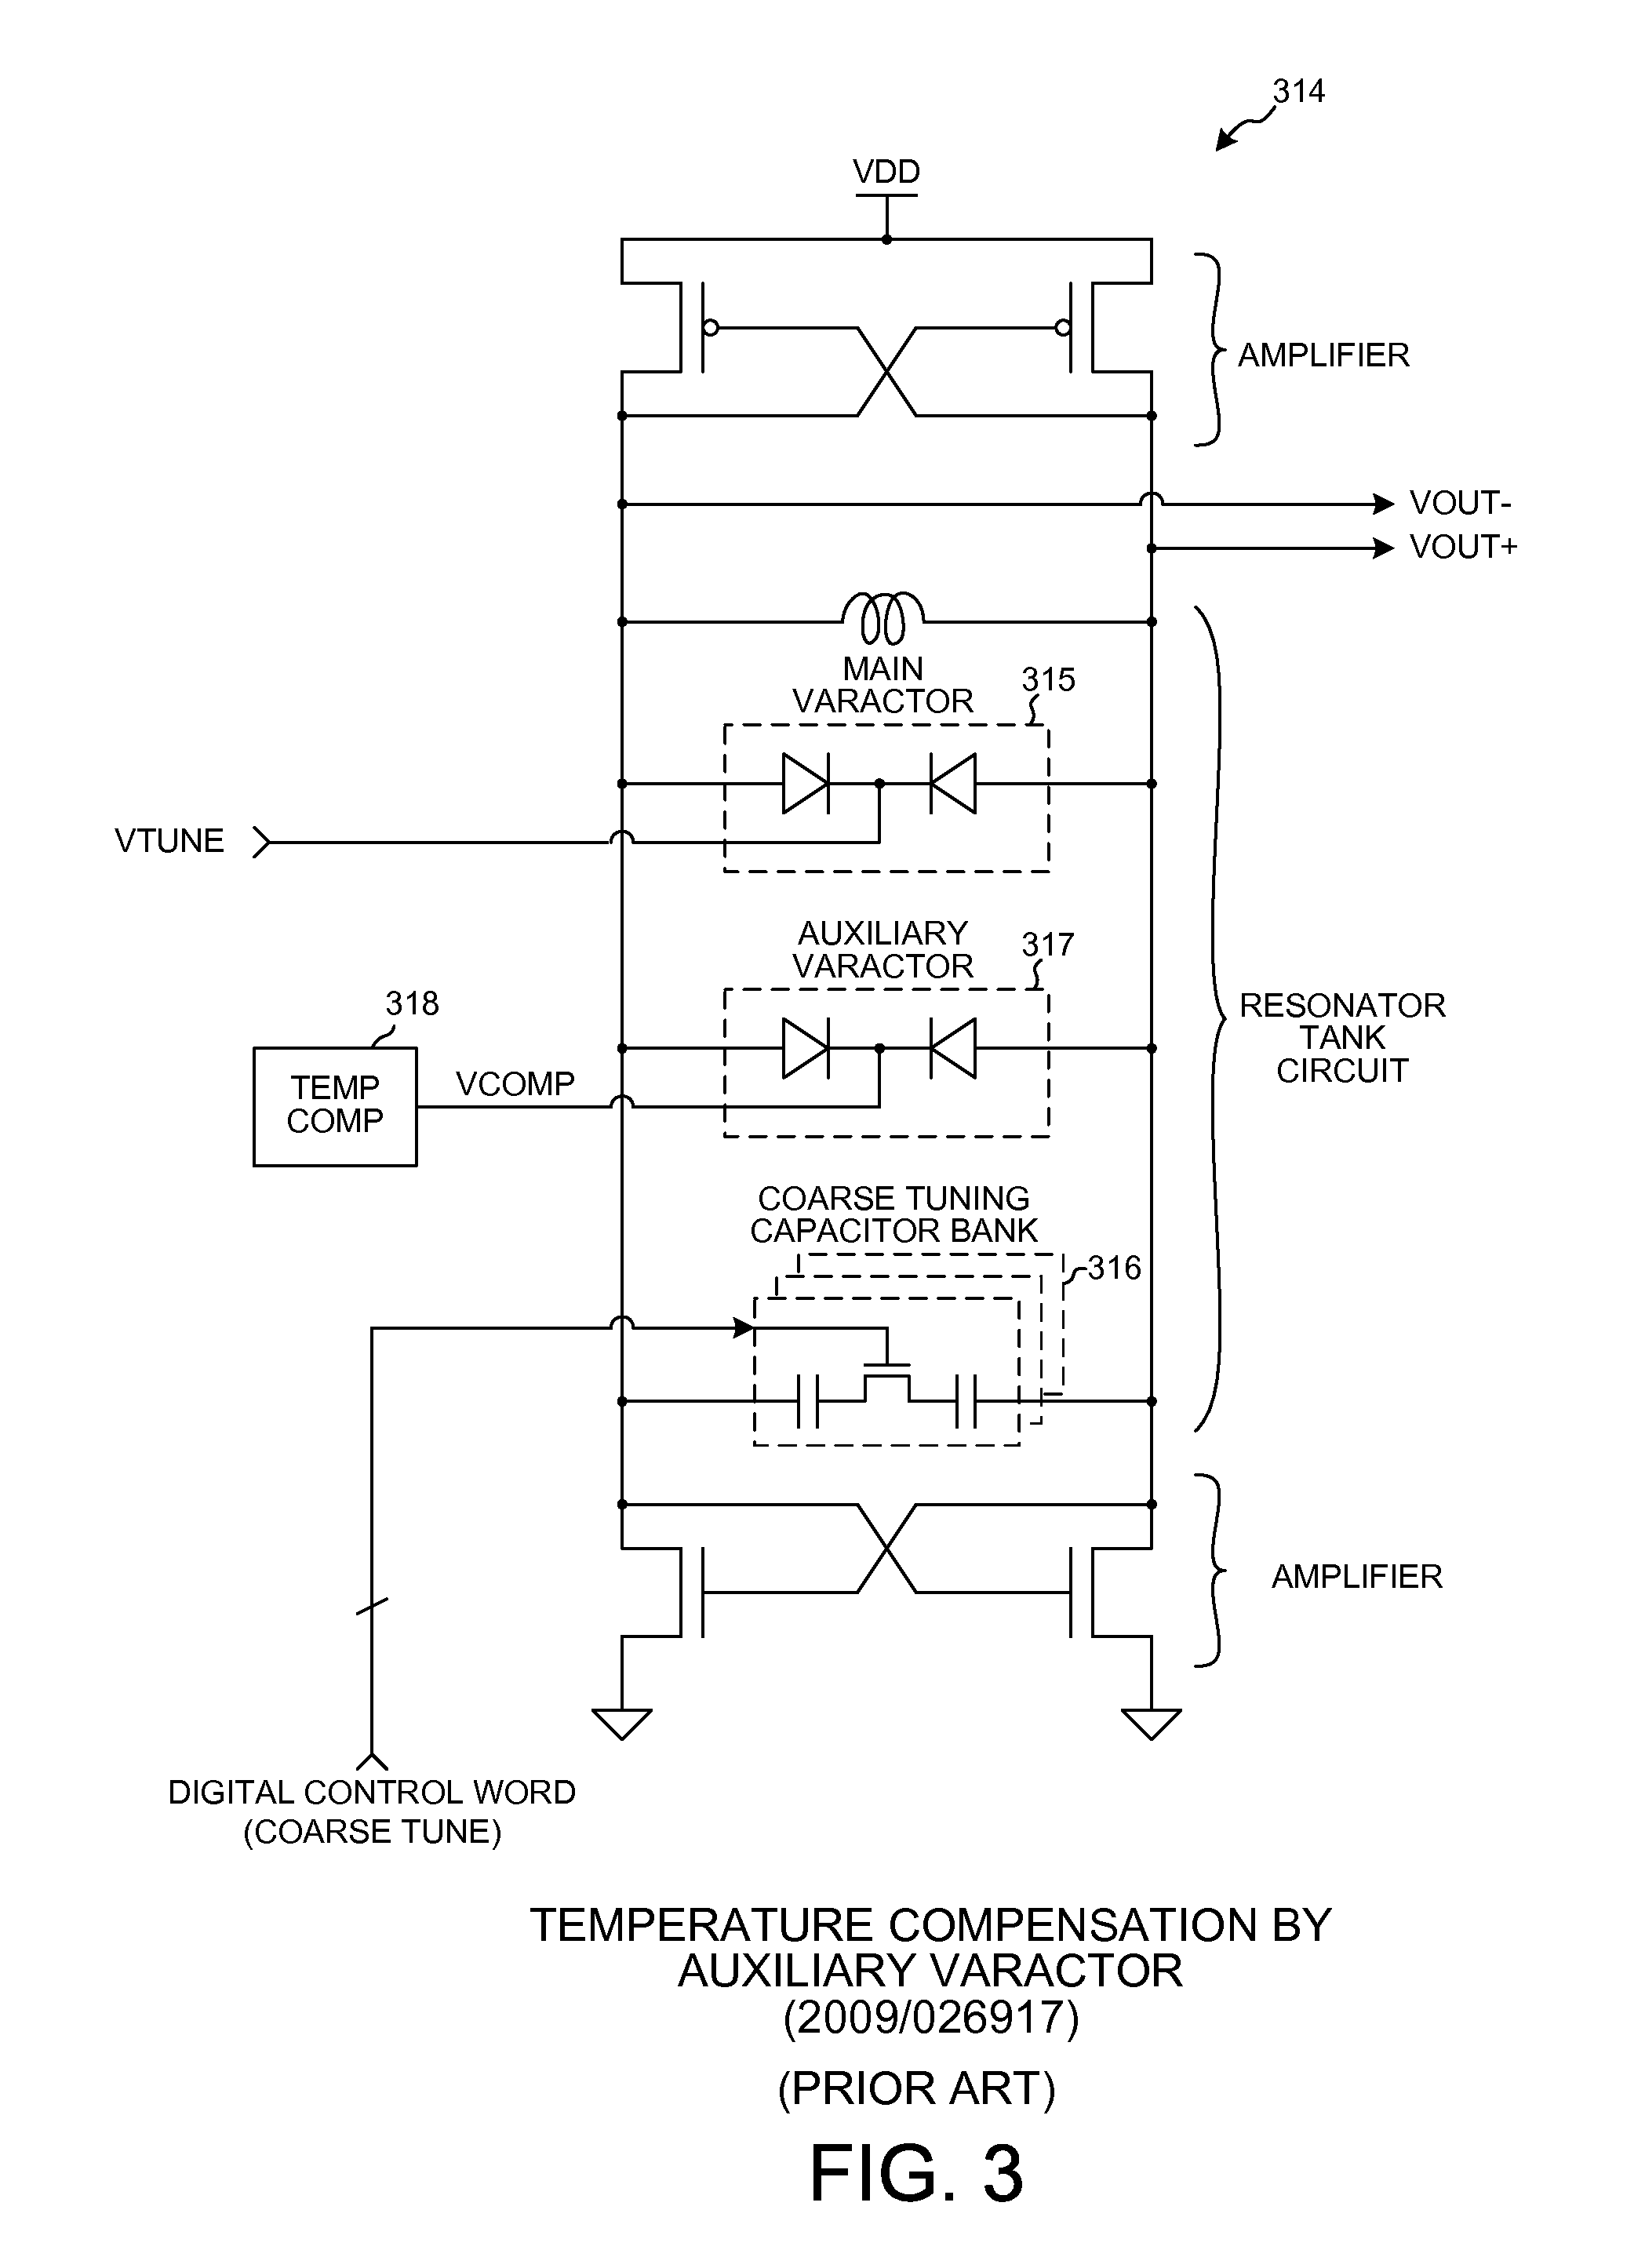 Wideband temperature compensated resonator and wideband VCO